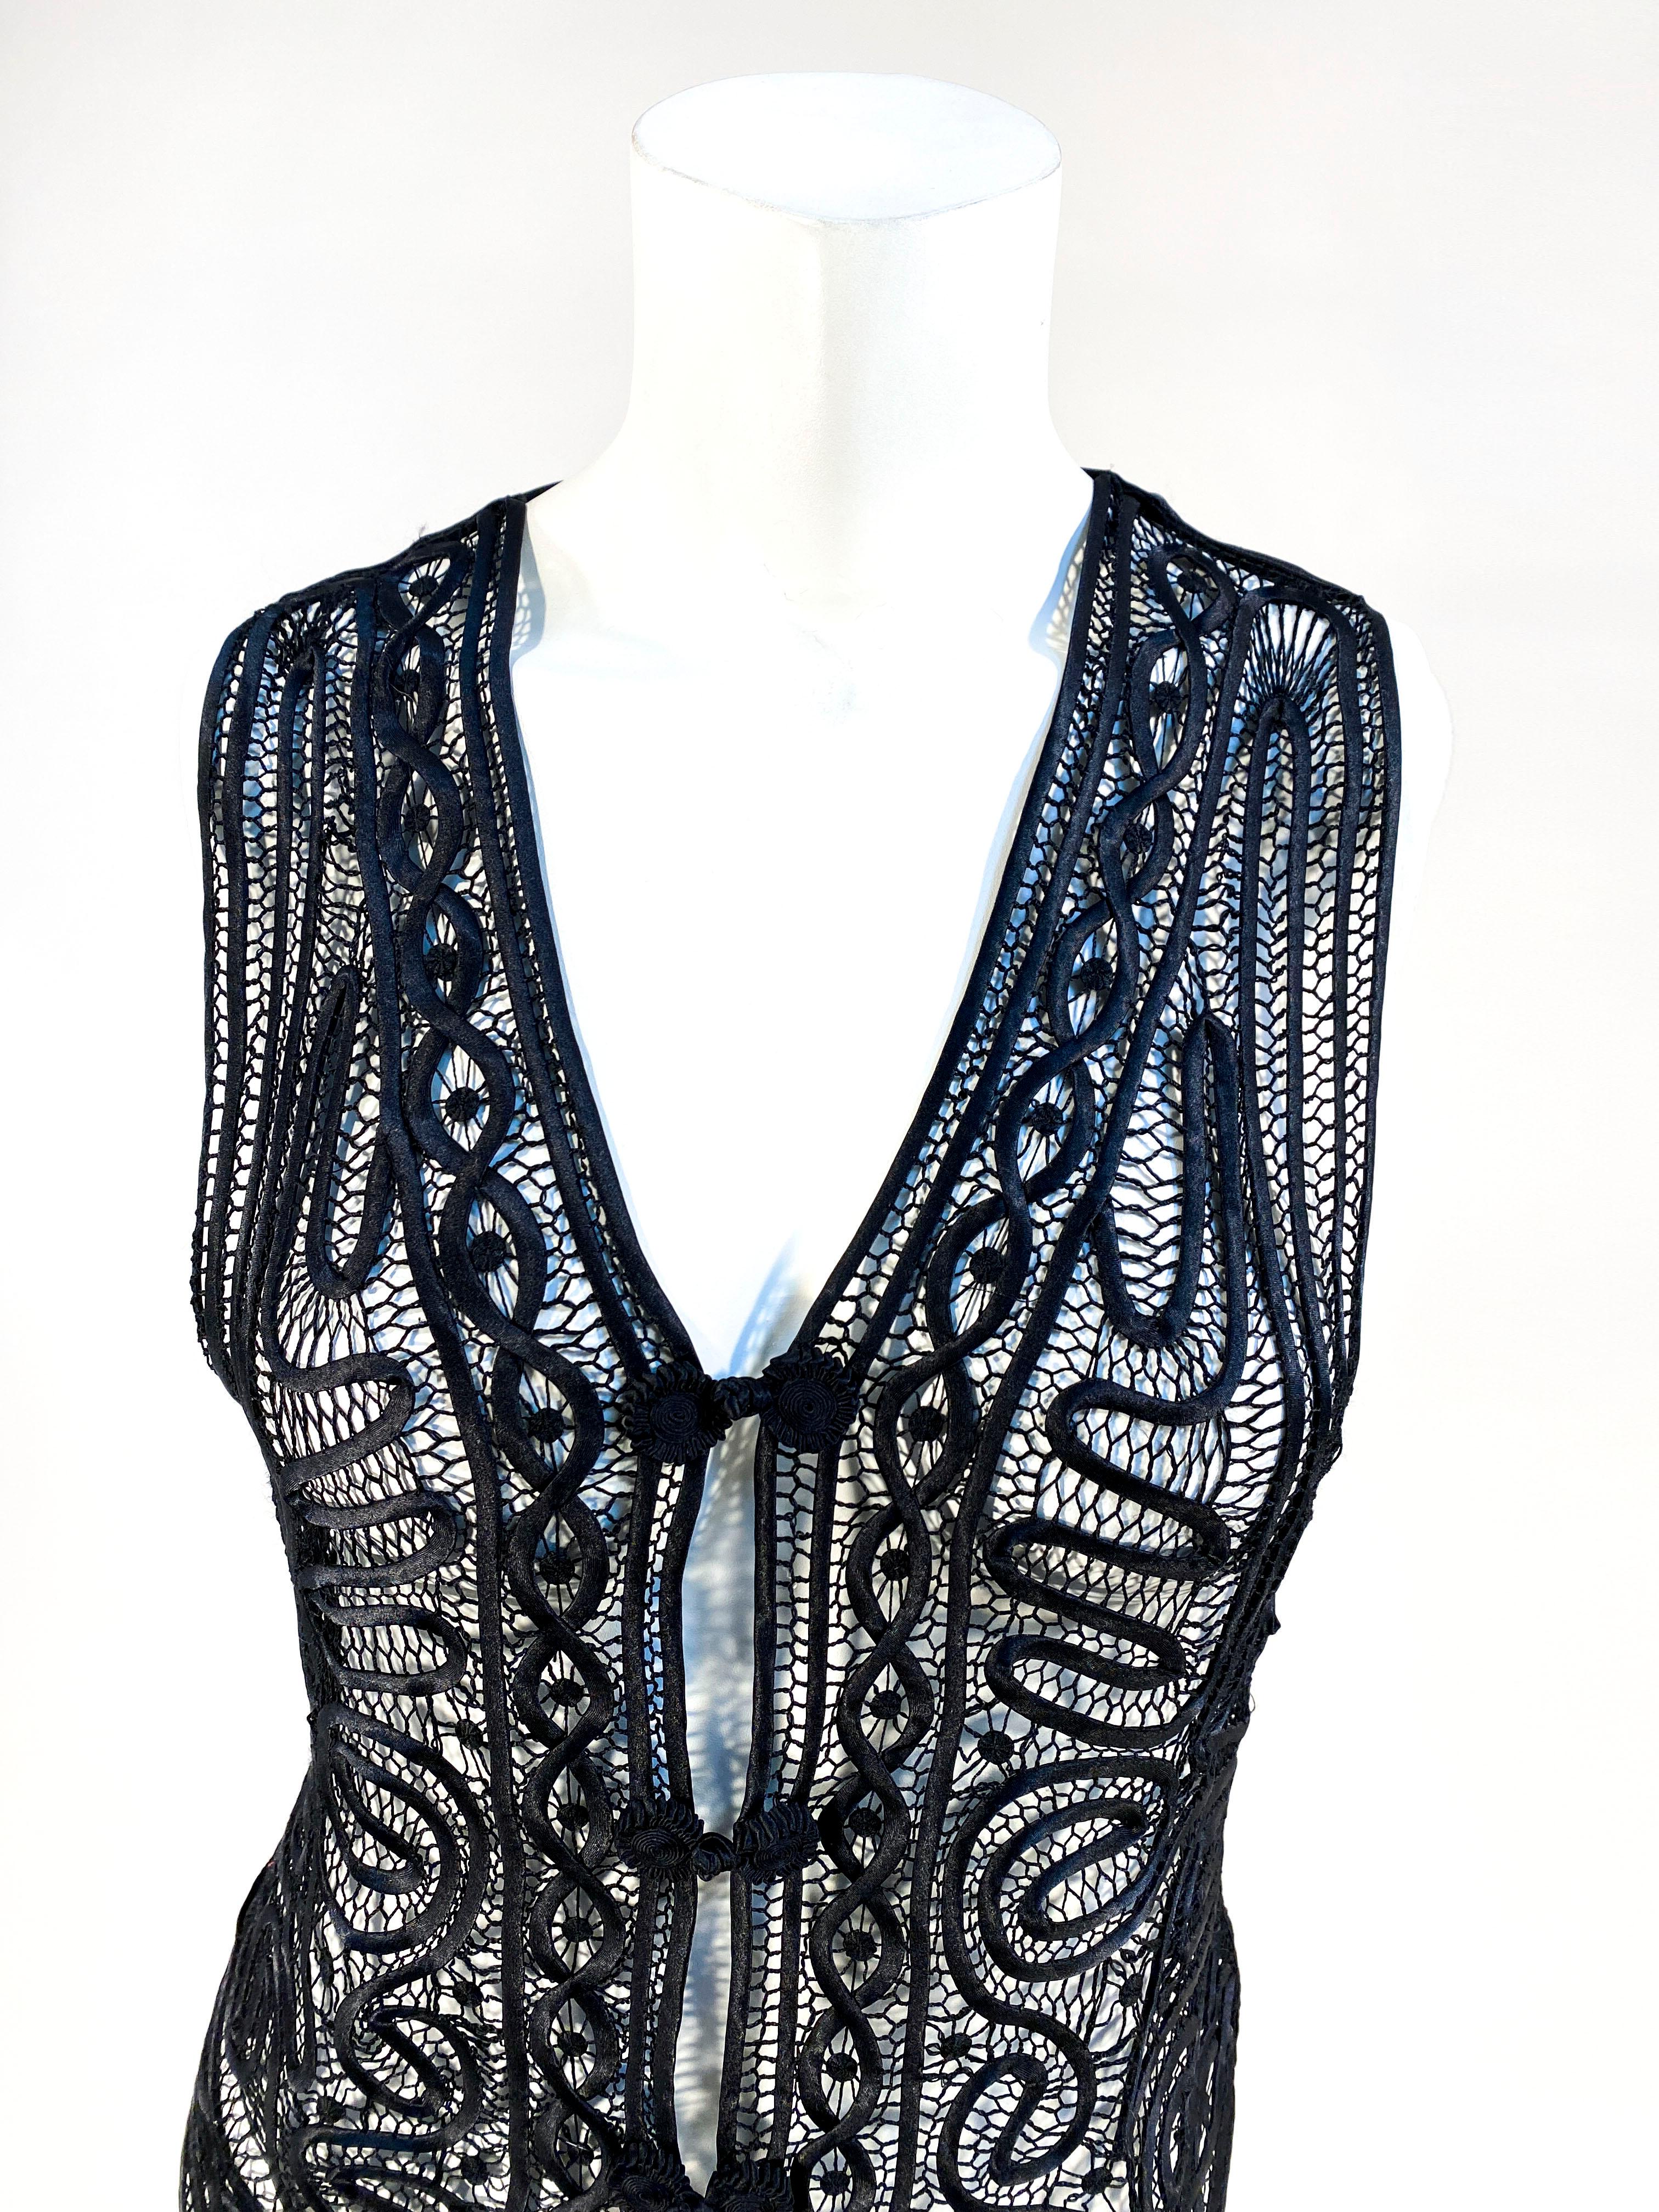 Early 20th Century black silk satin ribbon work and hand crochet vest in an intricate art neuveau patter. The front has three handmade frog closures in silk satin.